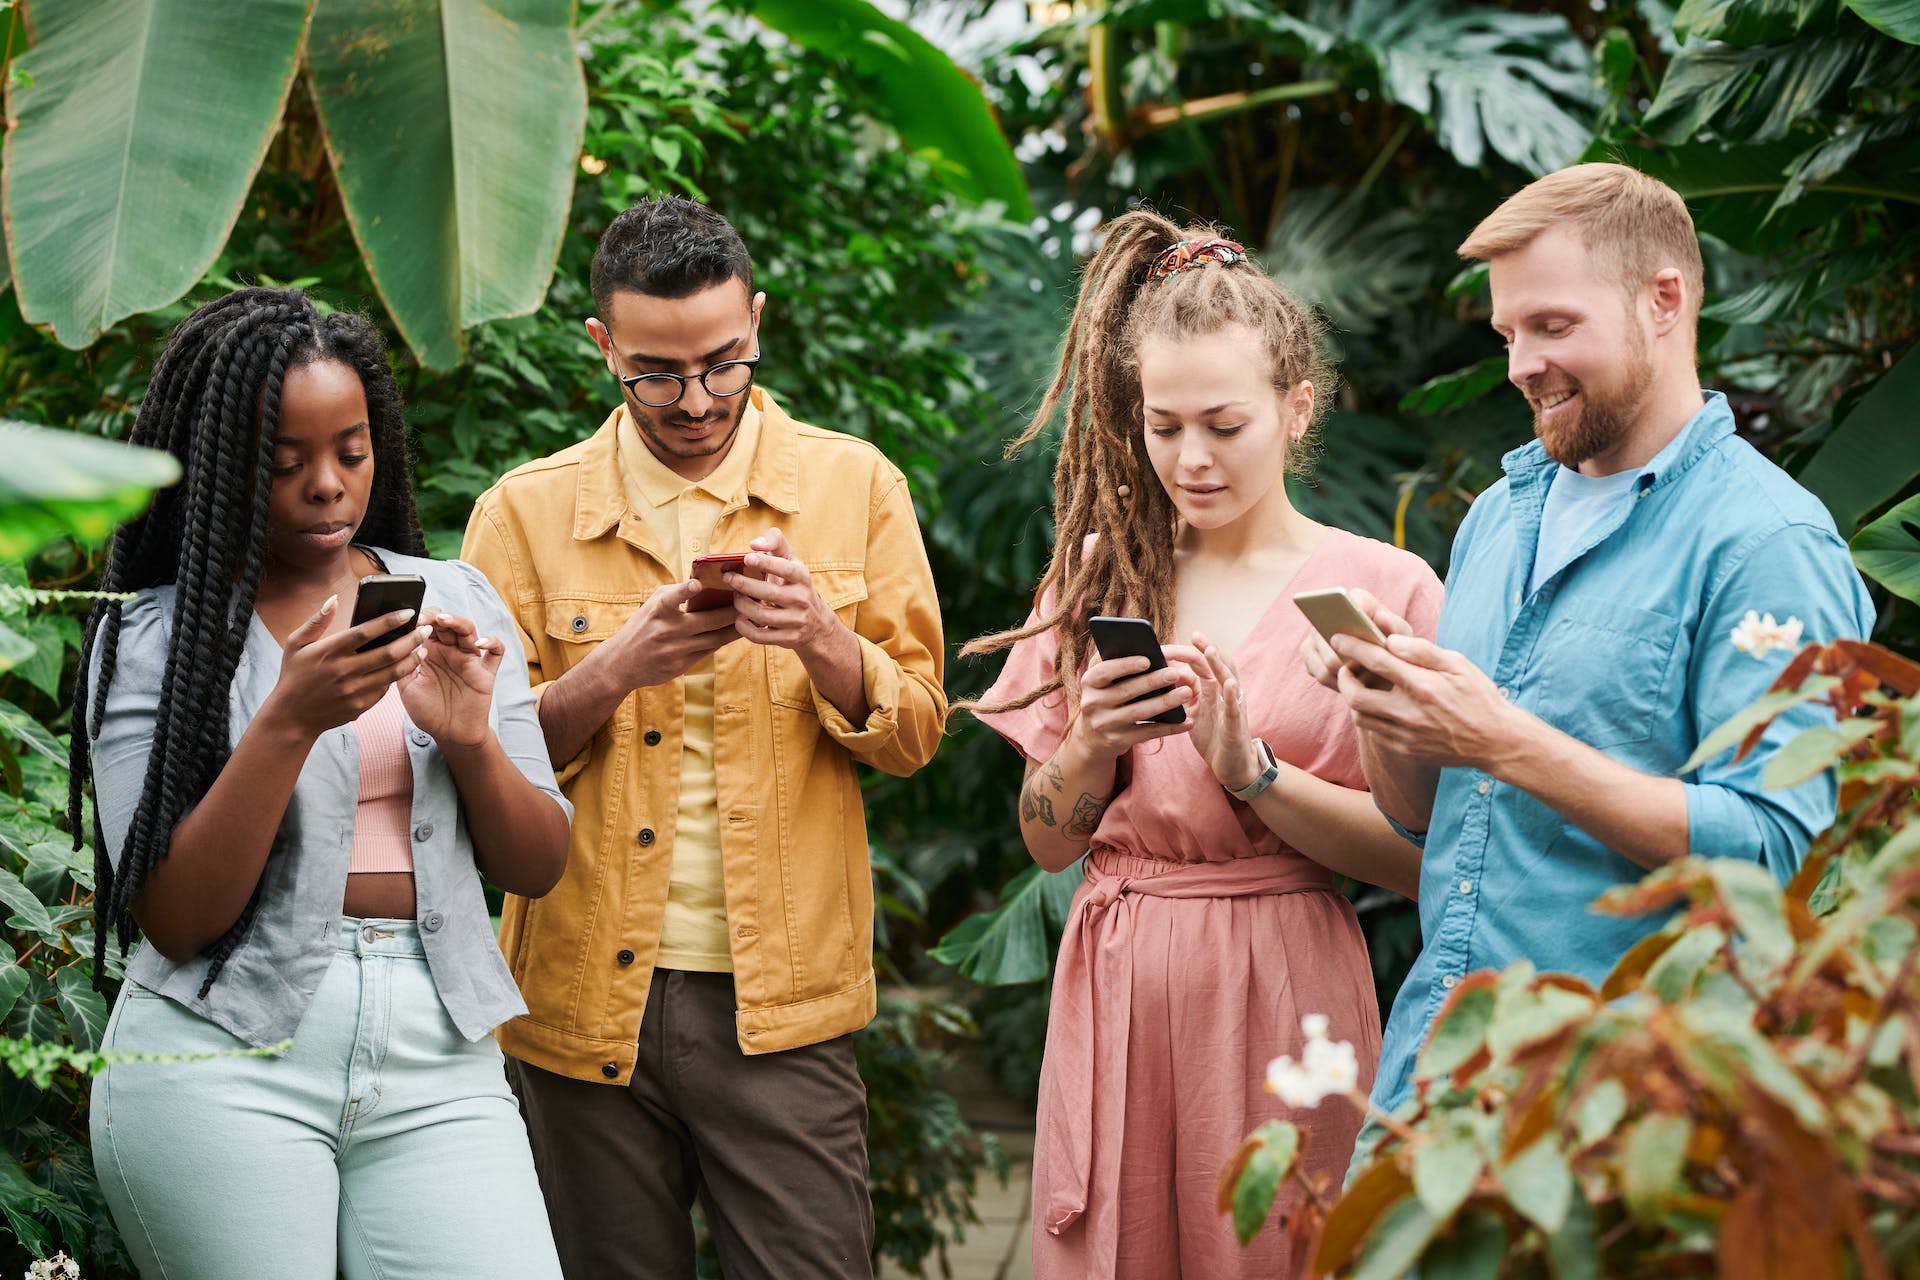 A diverse group of four people in a lush greenhouse, each focused intently on their smartphones. They stand amid vibrant green foliage, suggesting a relaxed yet engaging atmosphere of learning and connectivity. This image evokes a sense of community and the shared pursuit of knowledge, embodying the collaborative spirit of the "Instagram Branding Seminar".